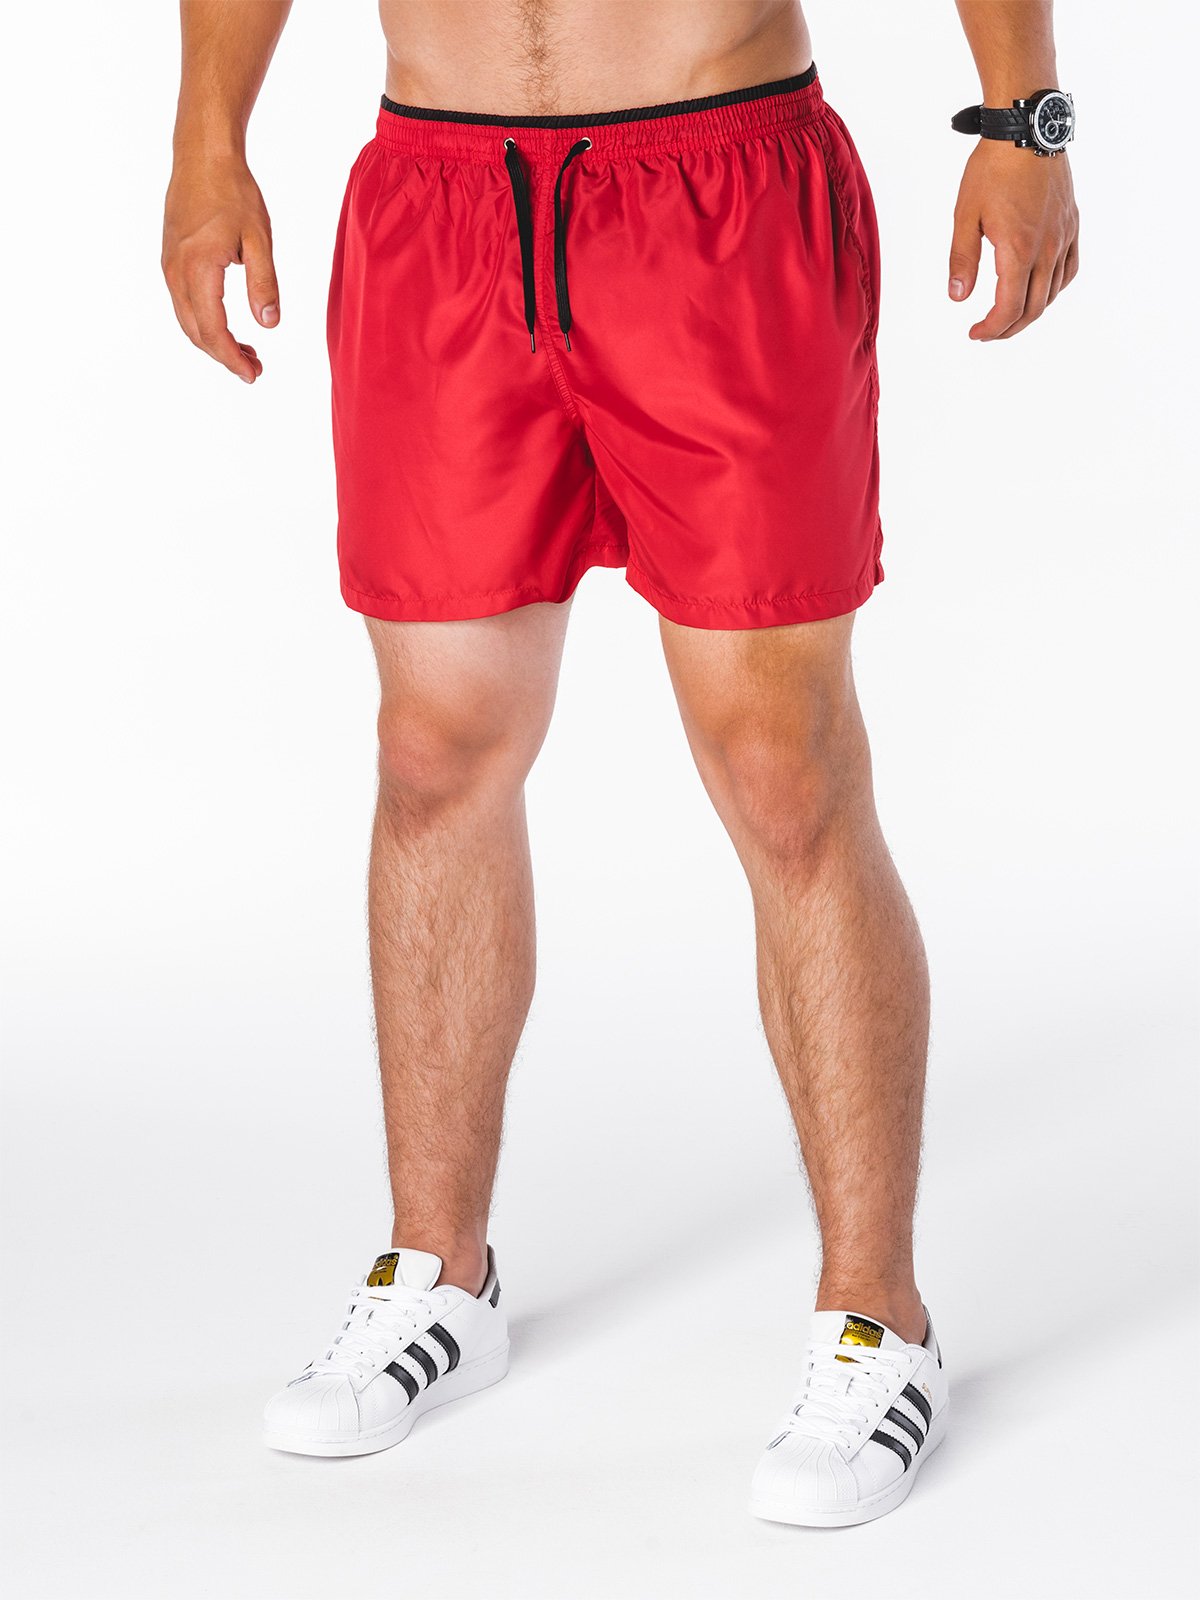 Men's shorts W090 - red | MODONE wholesale - Clothing For Men